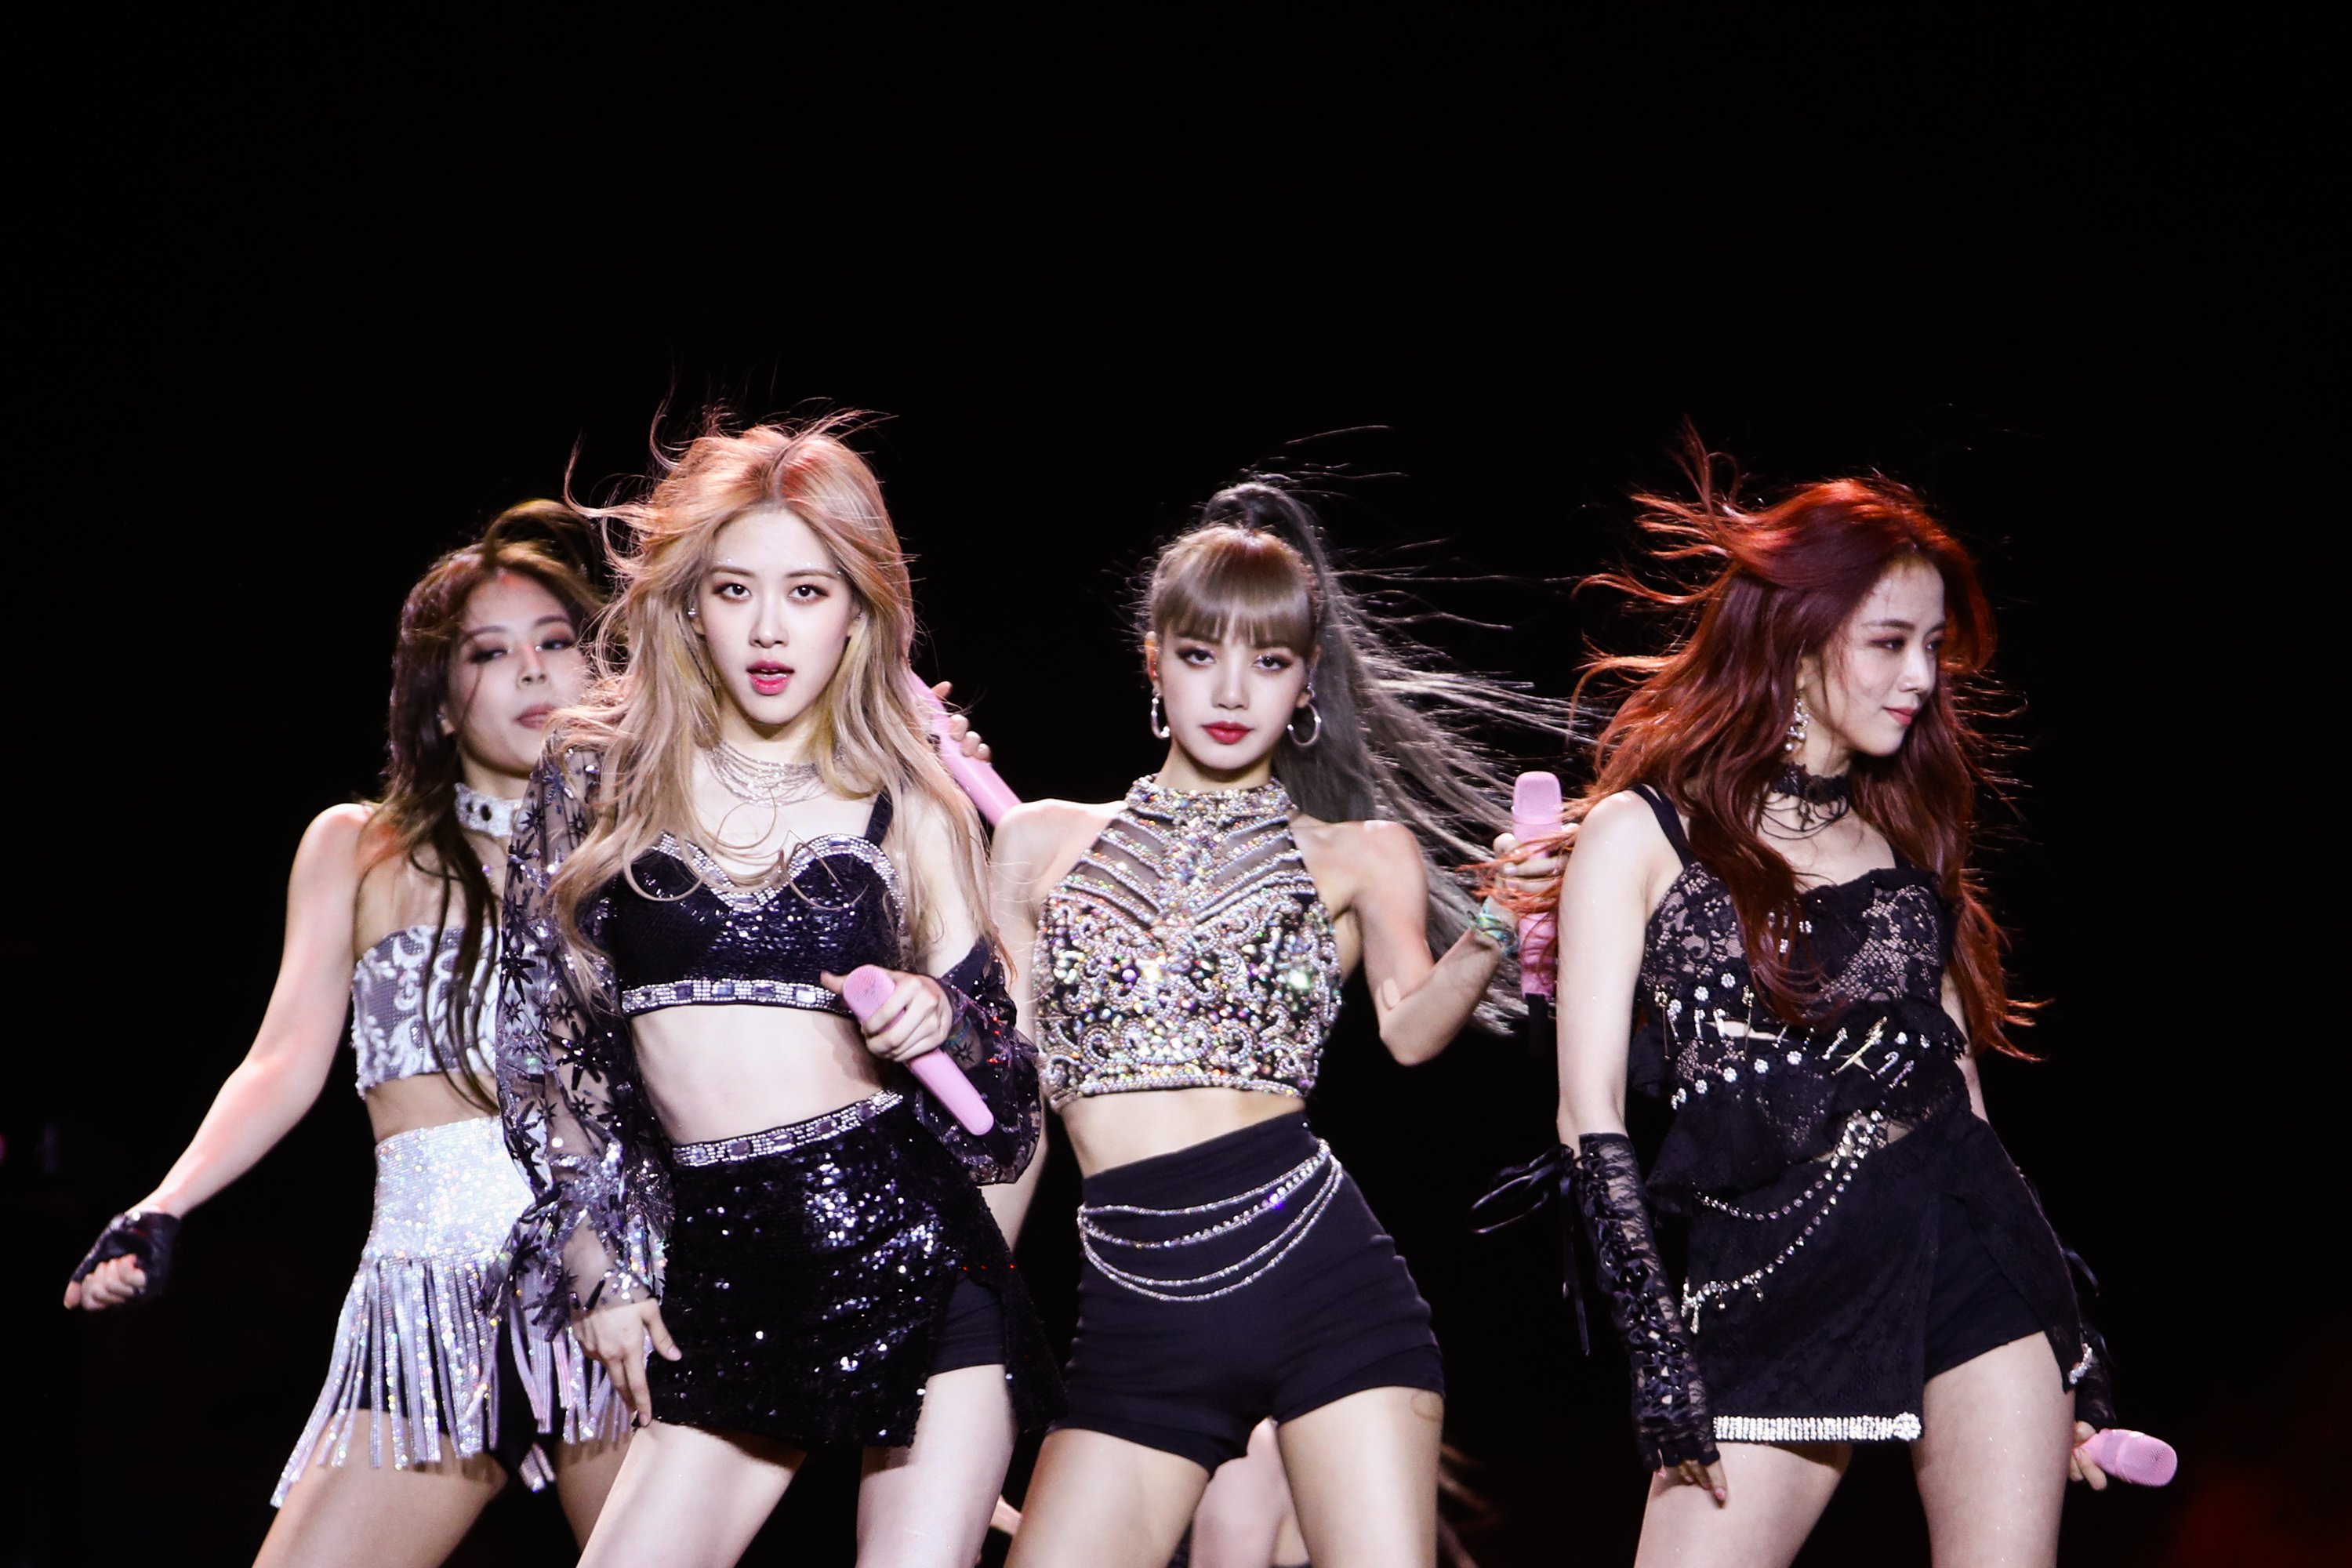 BLACKPINK perform at the 2019 Coachella Valley Music And Arts Festival